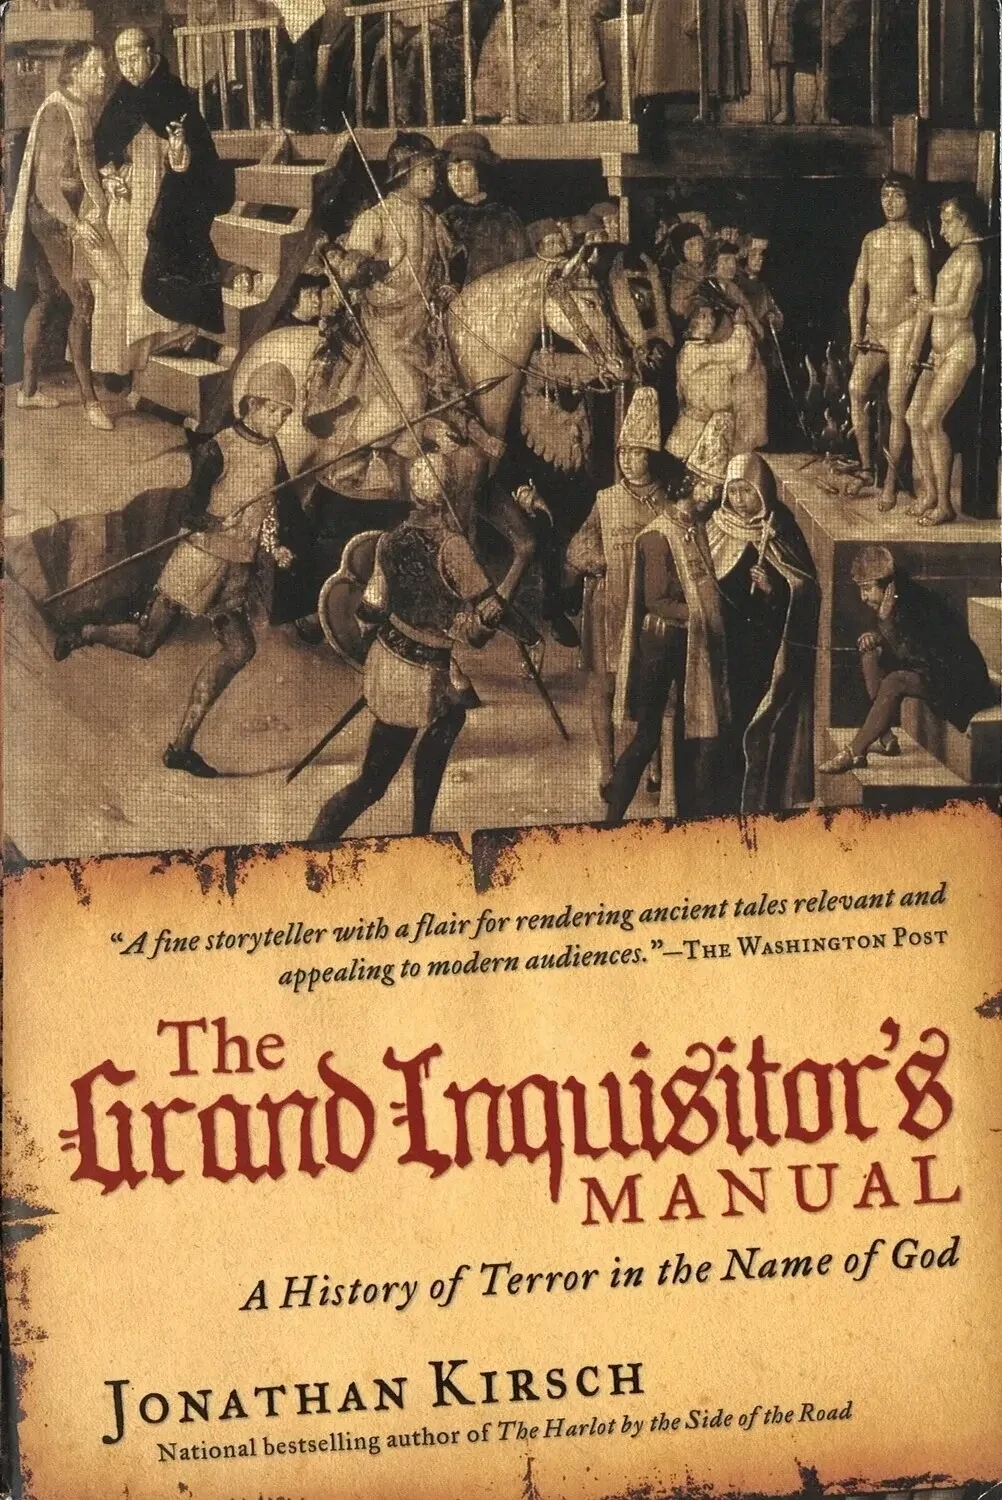 The Grand Inquisitor's Manual by Jonathan Kirsch